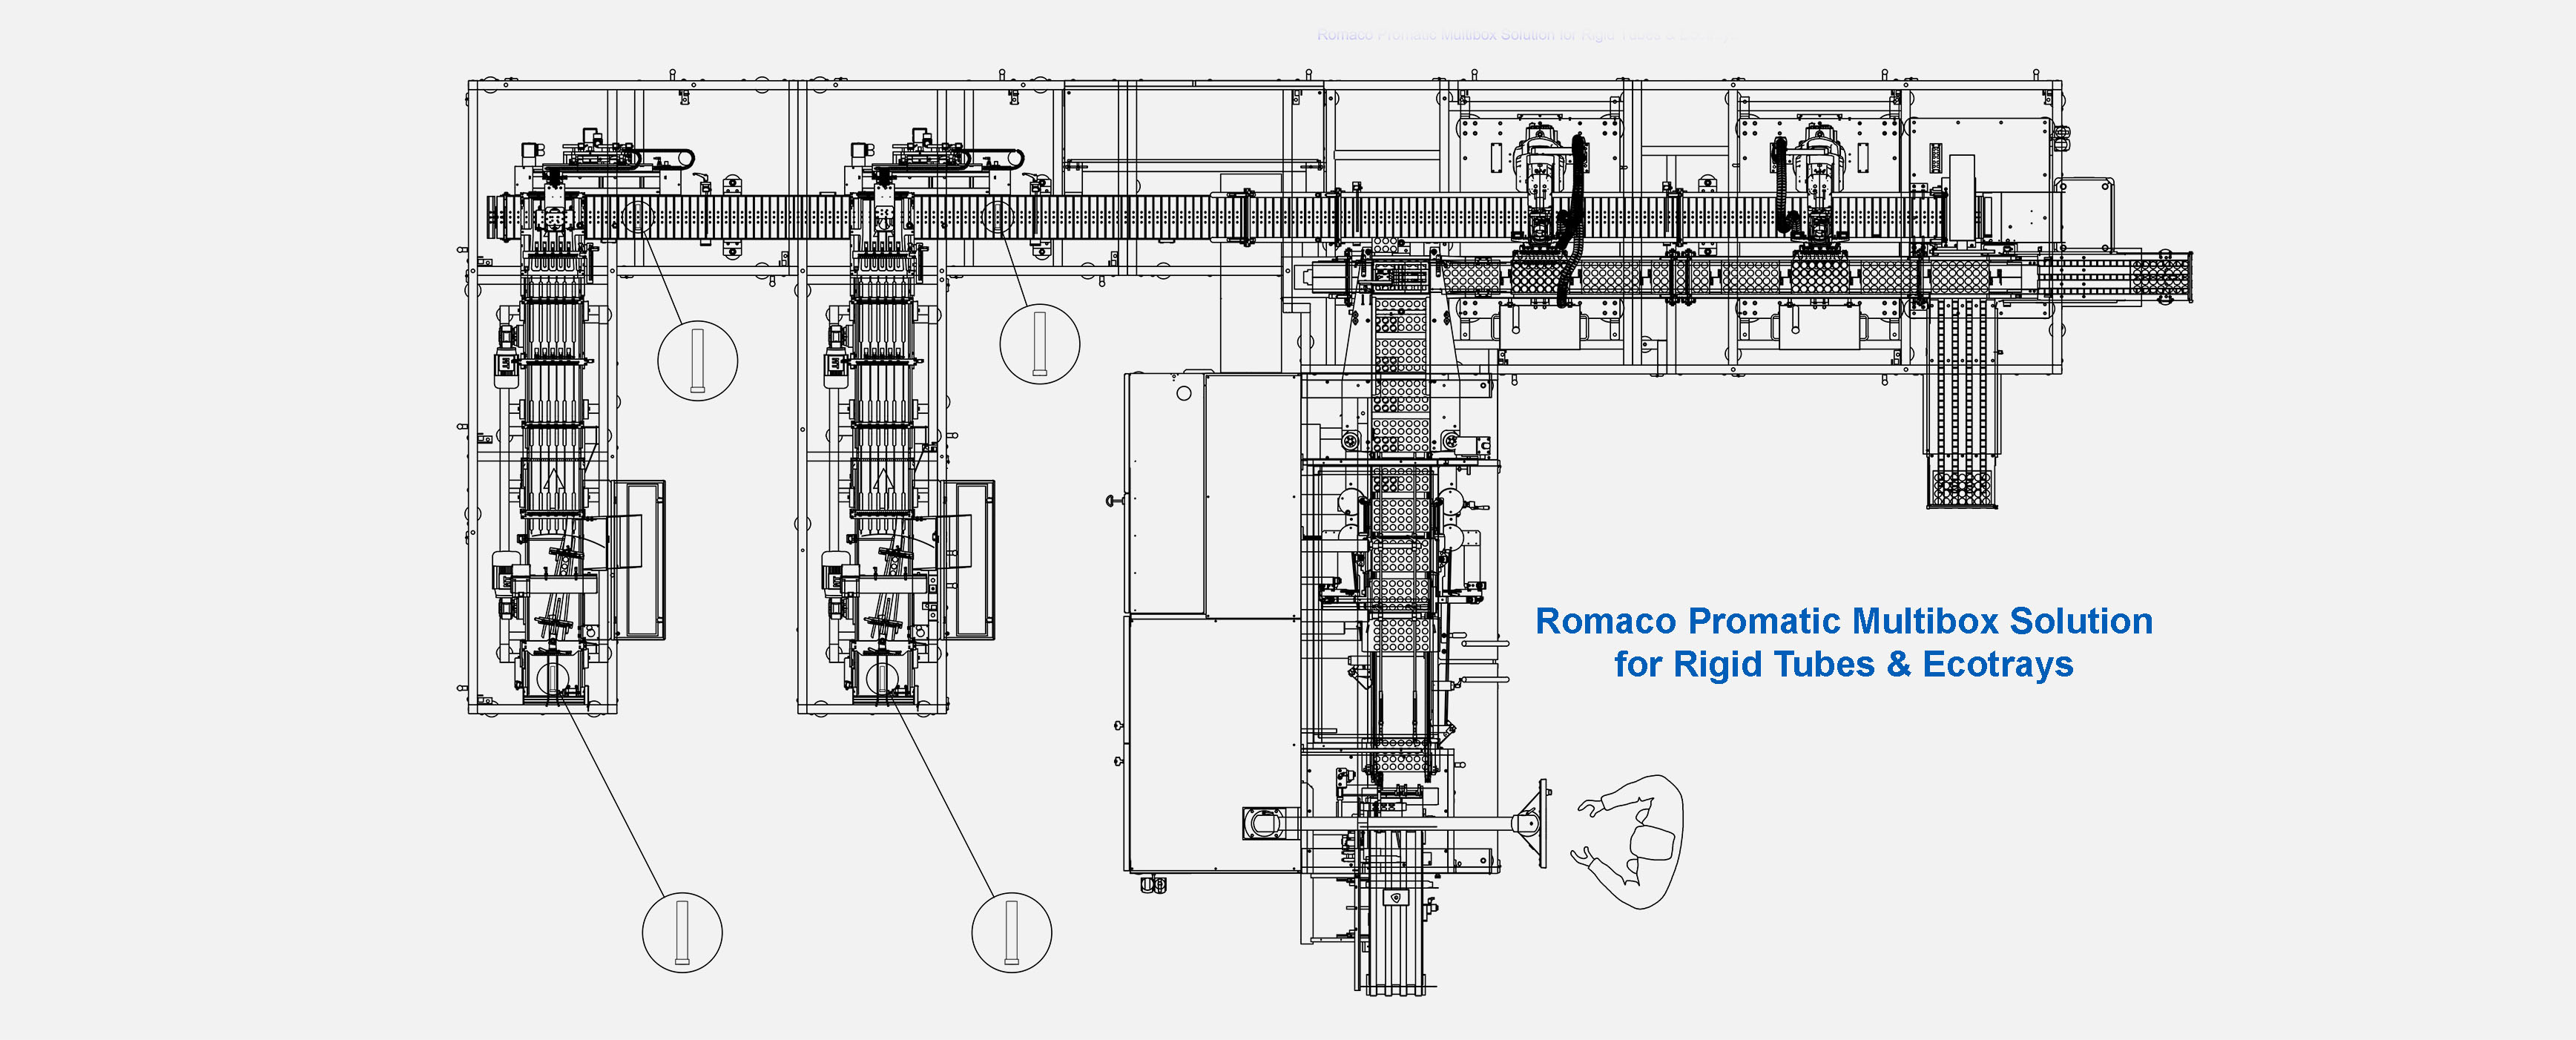 Possible layout for a cartoner processing rigid tubes - Romaco Promatic Multibox